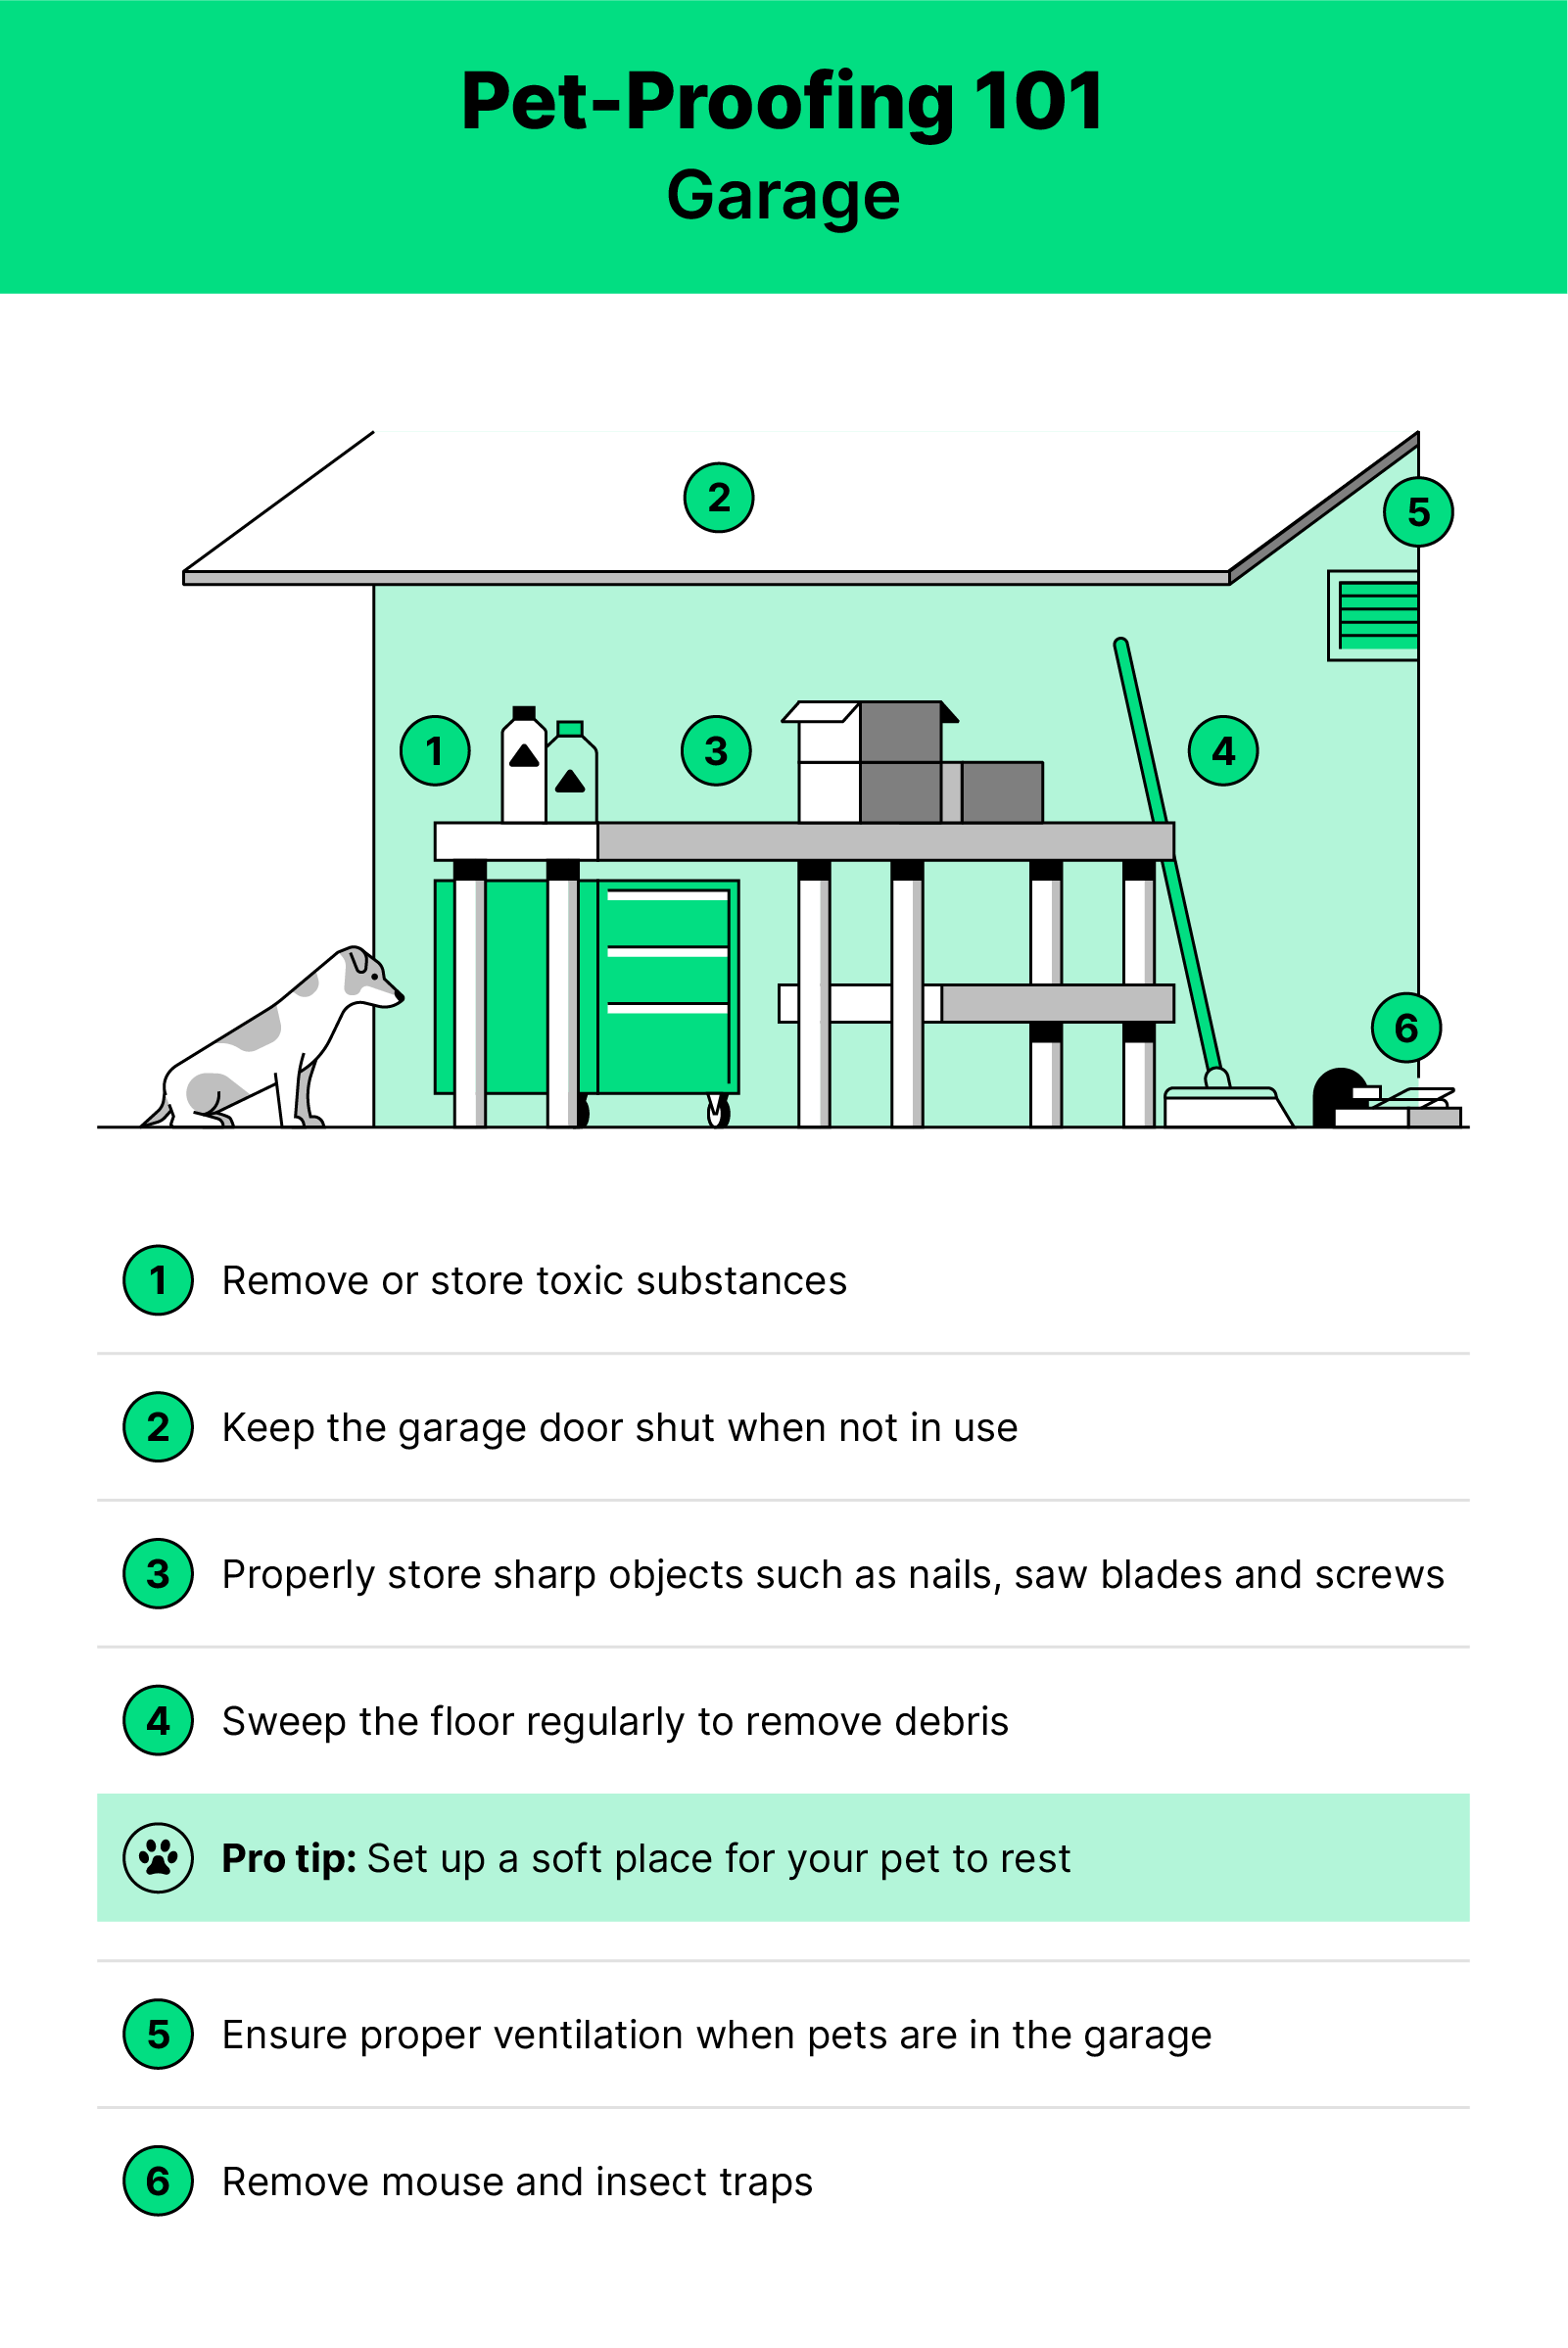 Green white and black illustration of a garage with a dog inside and pet proofing tips